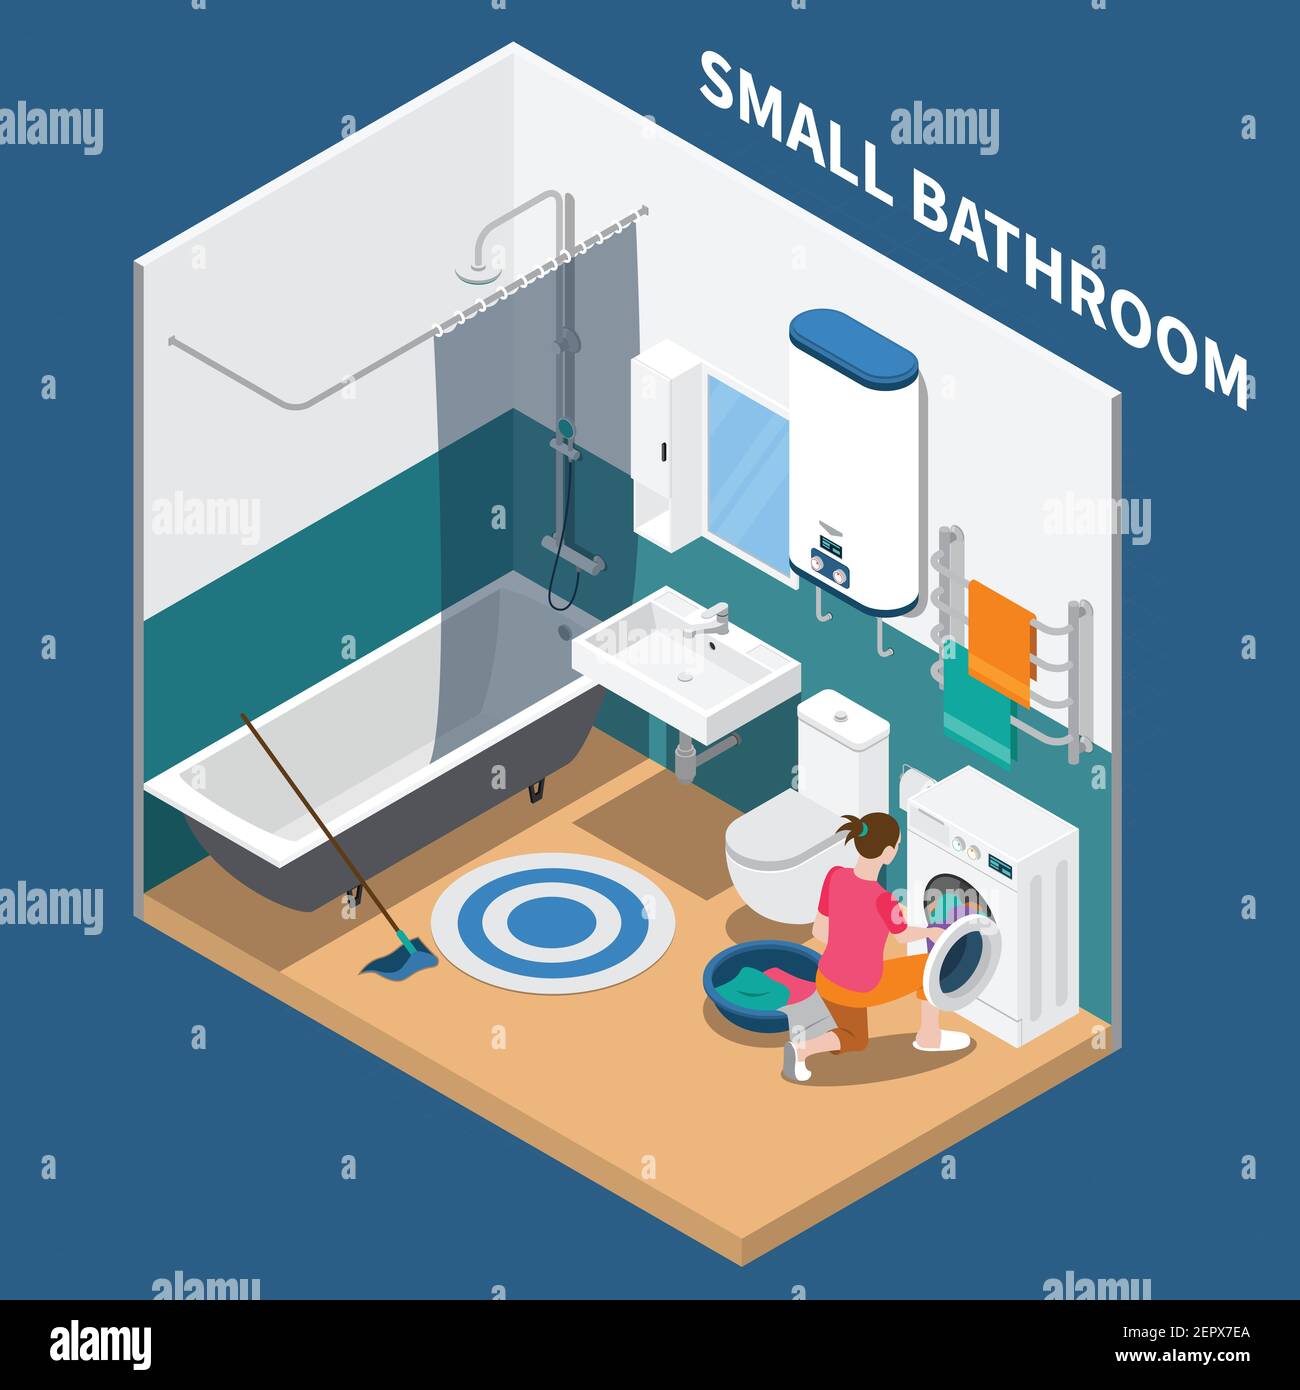 Small bath room isometric composition with plumbing, water heater, laundry machine, towel dryer, vector illustration Stock Vector